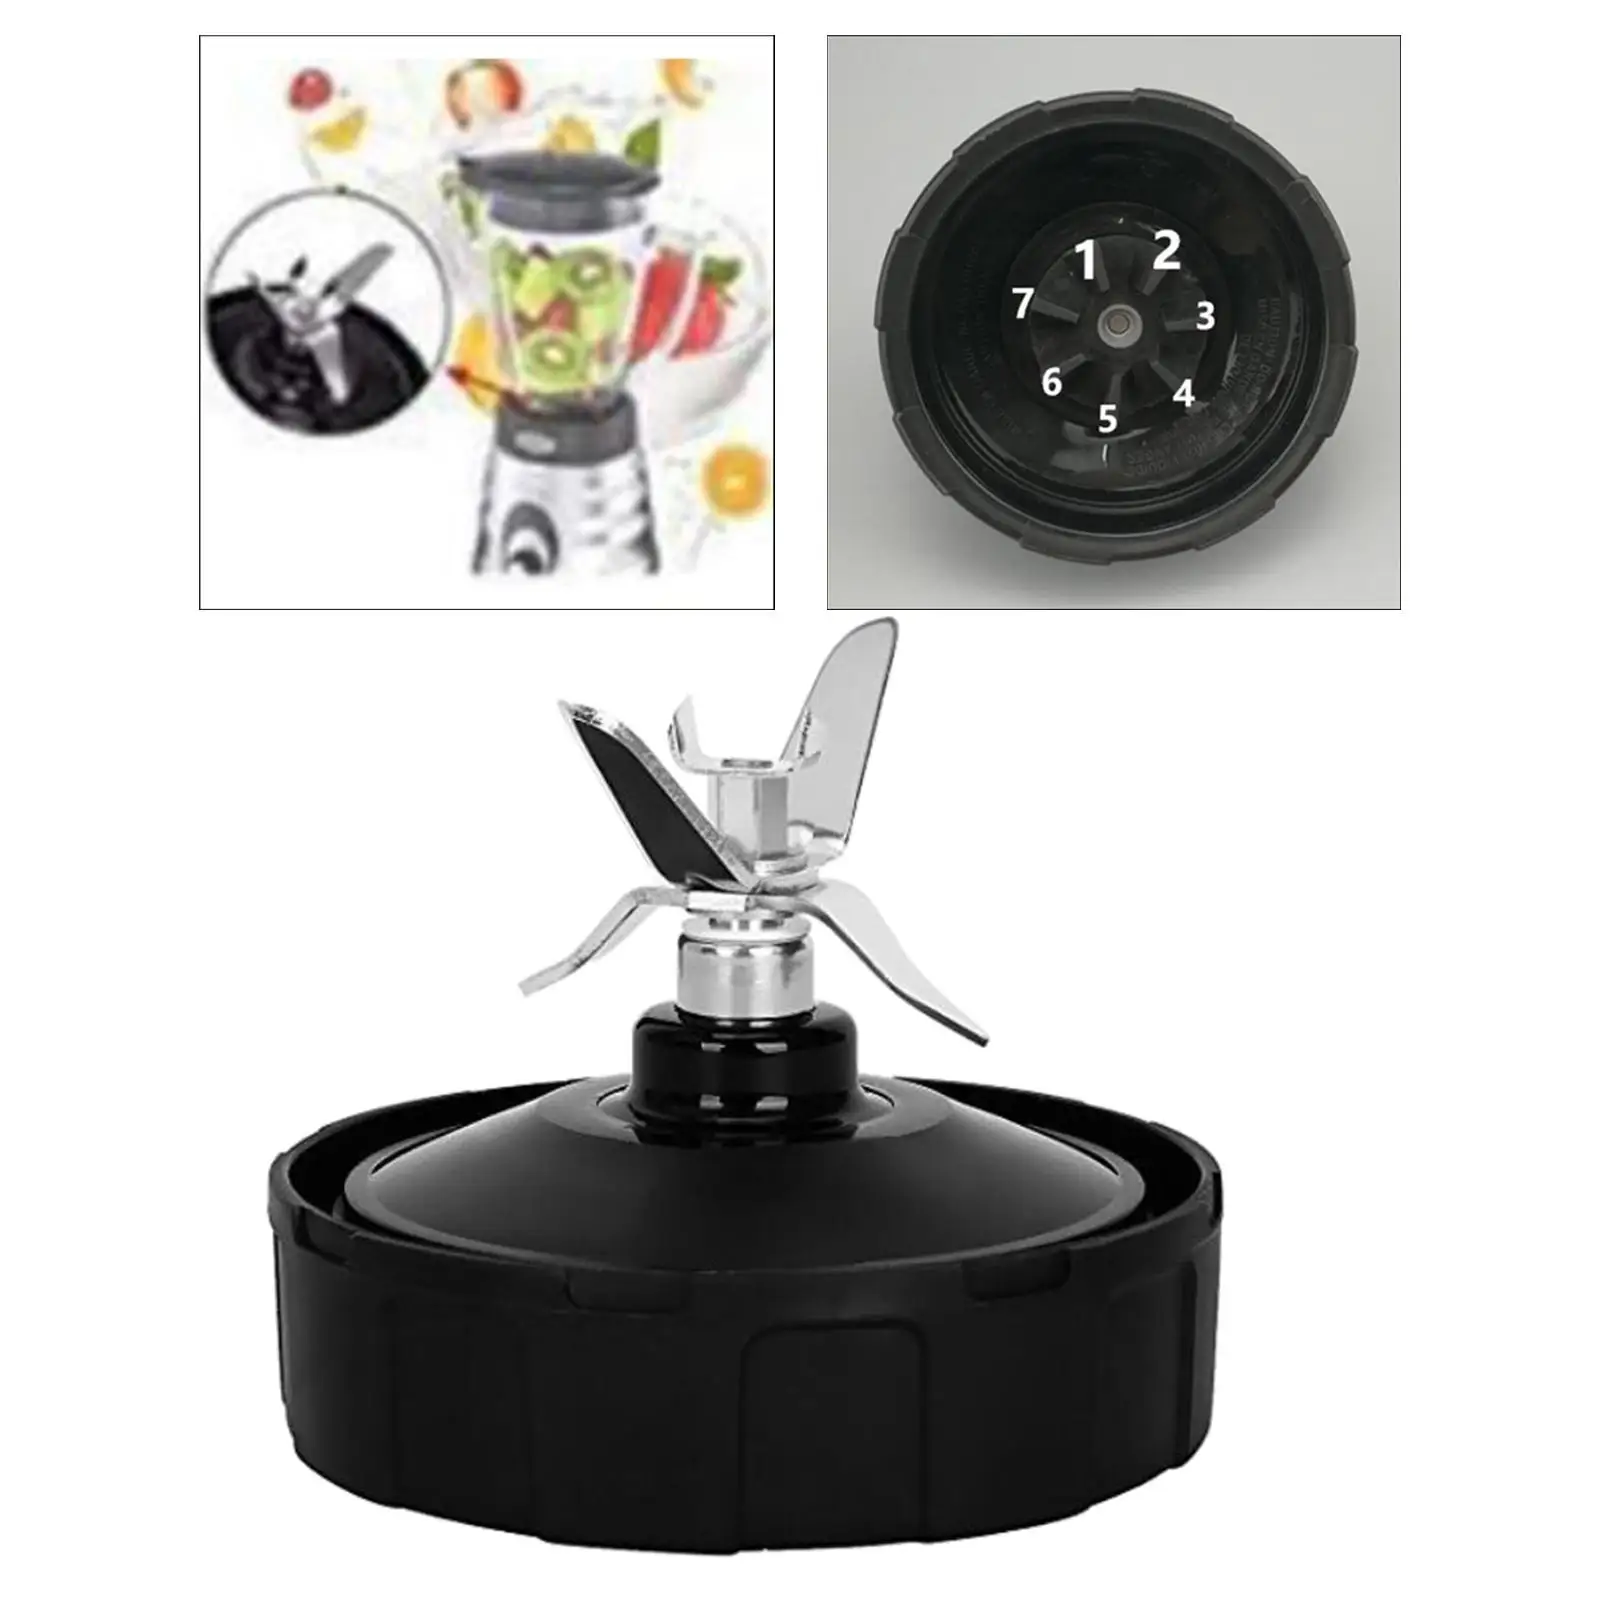 1 Set Extractor Blade 7 fin`s Black Stainless Steel Part Accs Juice Bottom Durable Blenders Compatible for Nutri Ninja